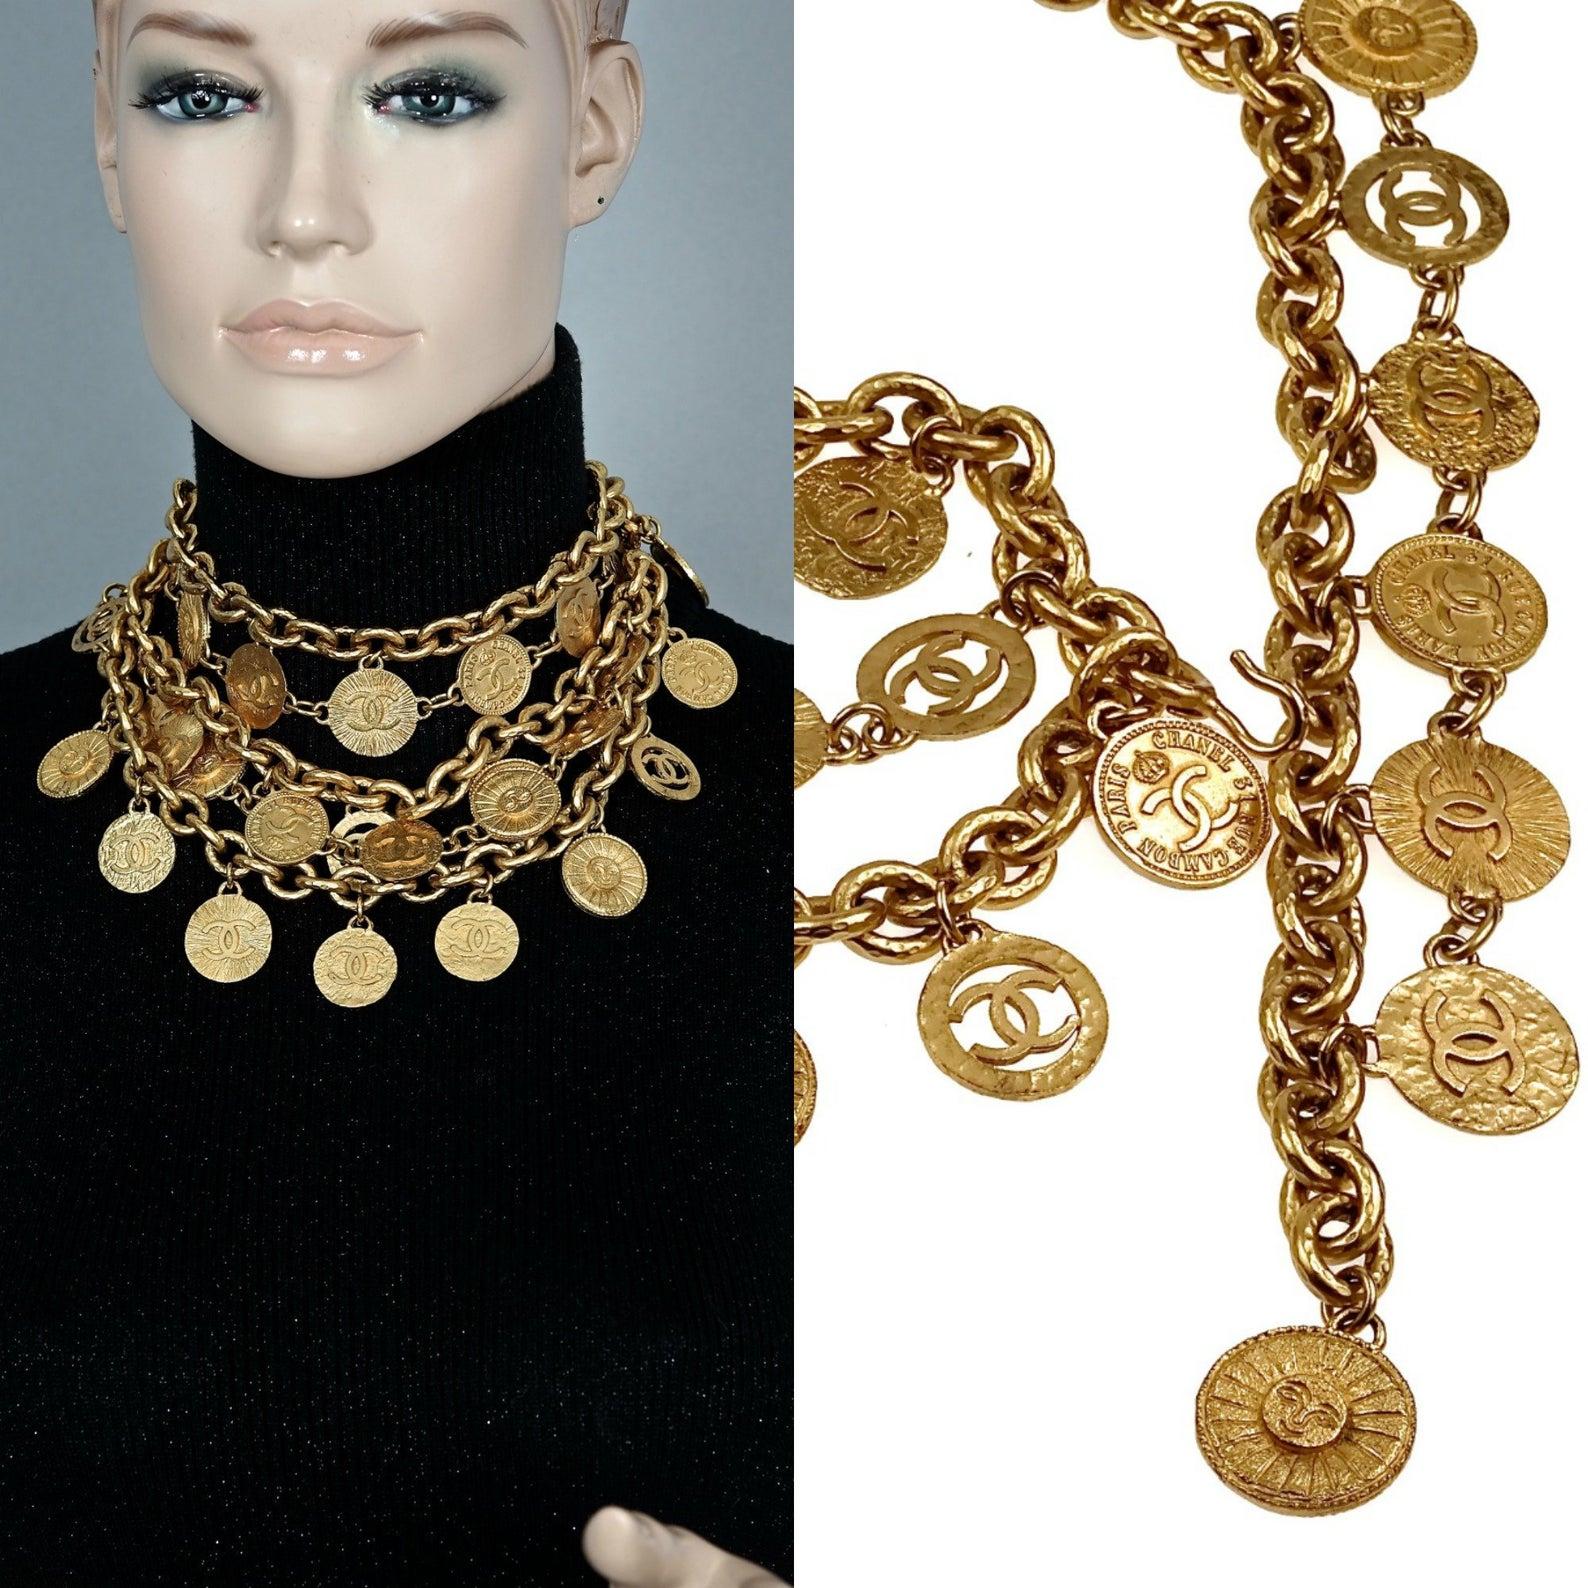 Features:
- 100% Authentic CHANEL from 1992 collection.
- Chunky chain and jumbo charms in gold tone.
- Compose of 9 massive Chanel logo charms - Cut Out CC logos, Coco Mademoiselle, elephant and wheat .
- Signed CHANEL 2 CC 9 Made in France.
- Hook